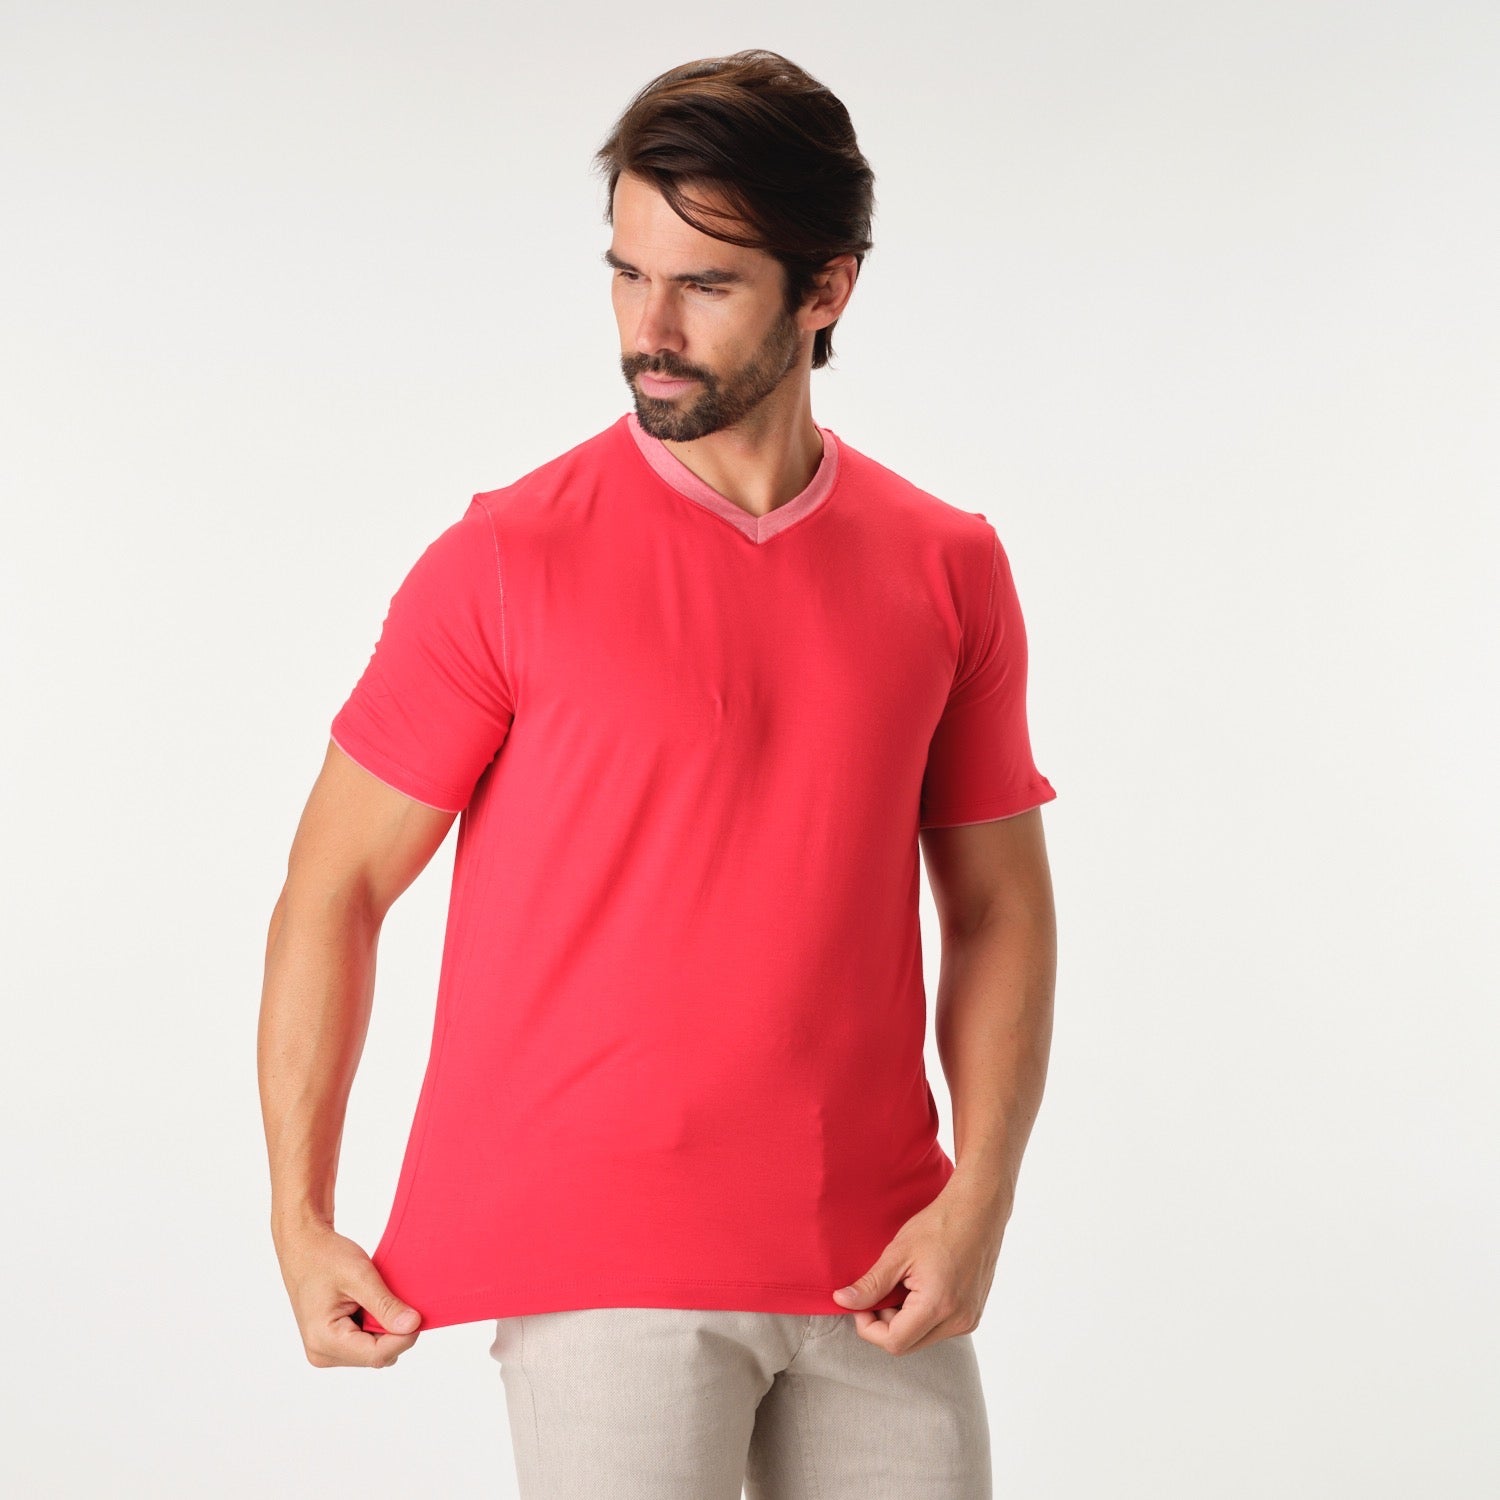 Solid Performance Red Ribbed V-Neck T-Shirt